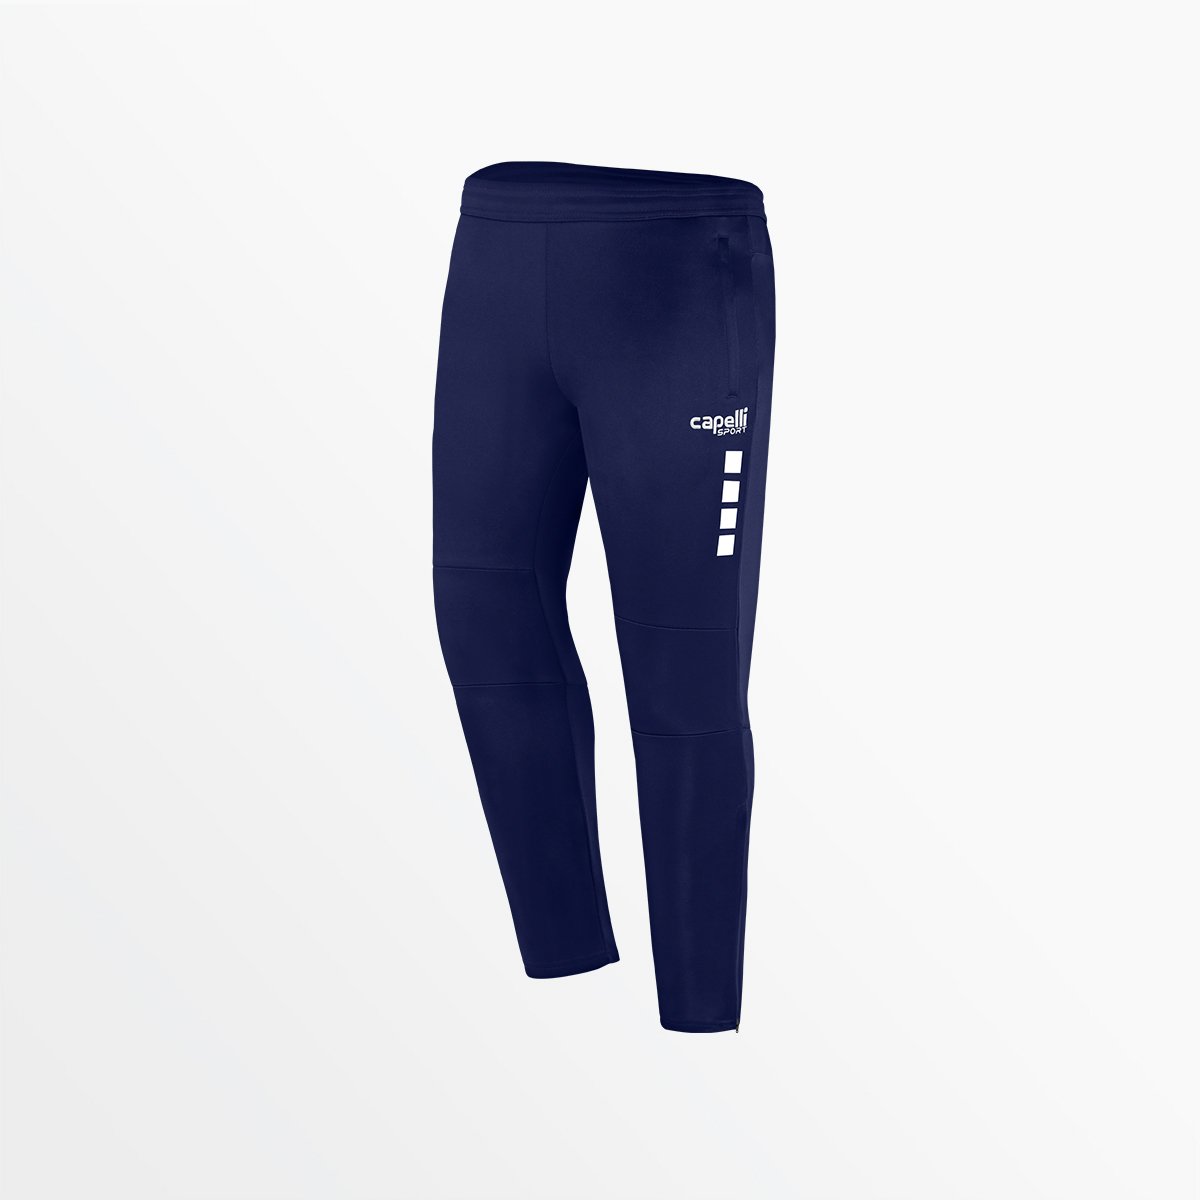 YOUTH UPTOWN TRAINING PANTS